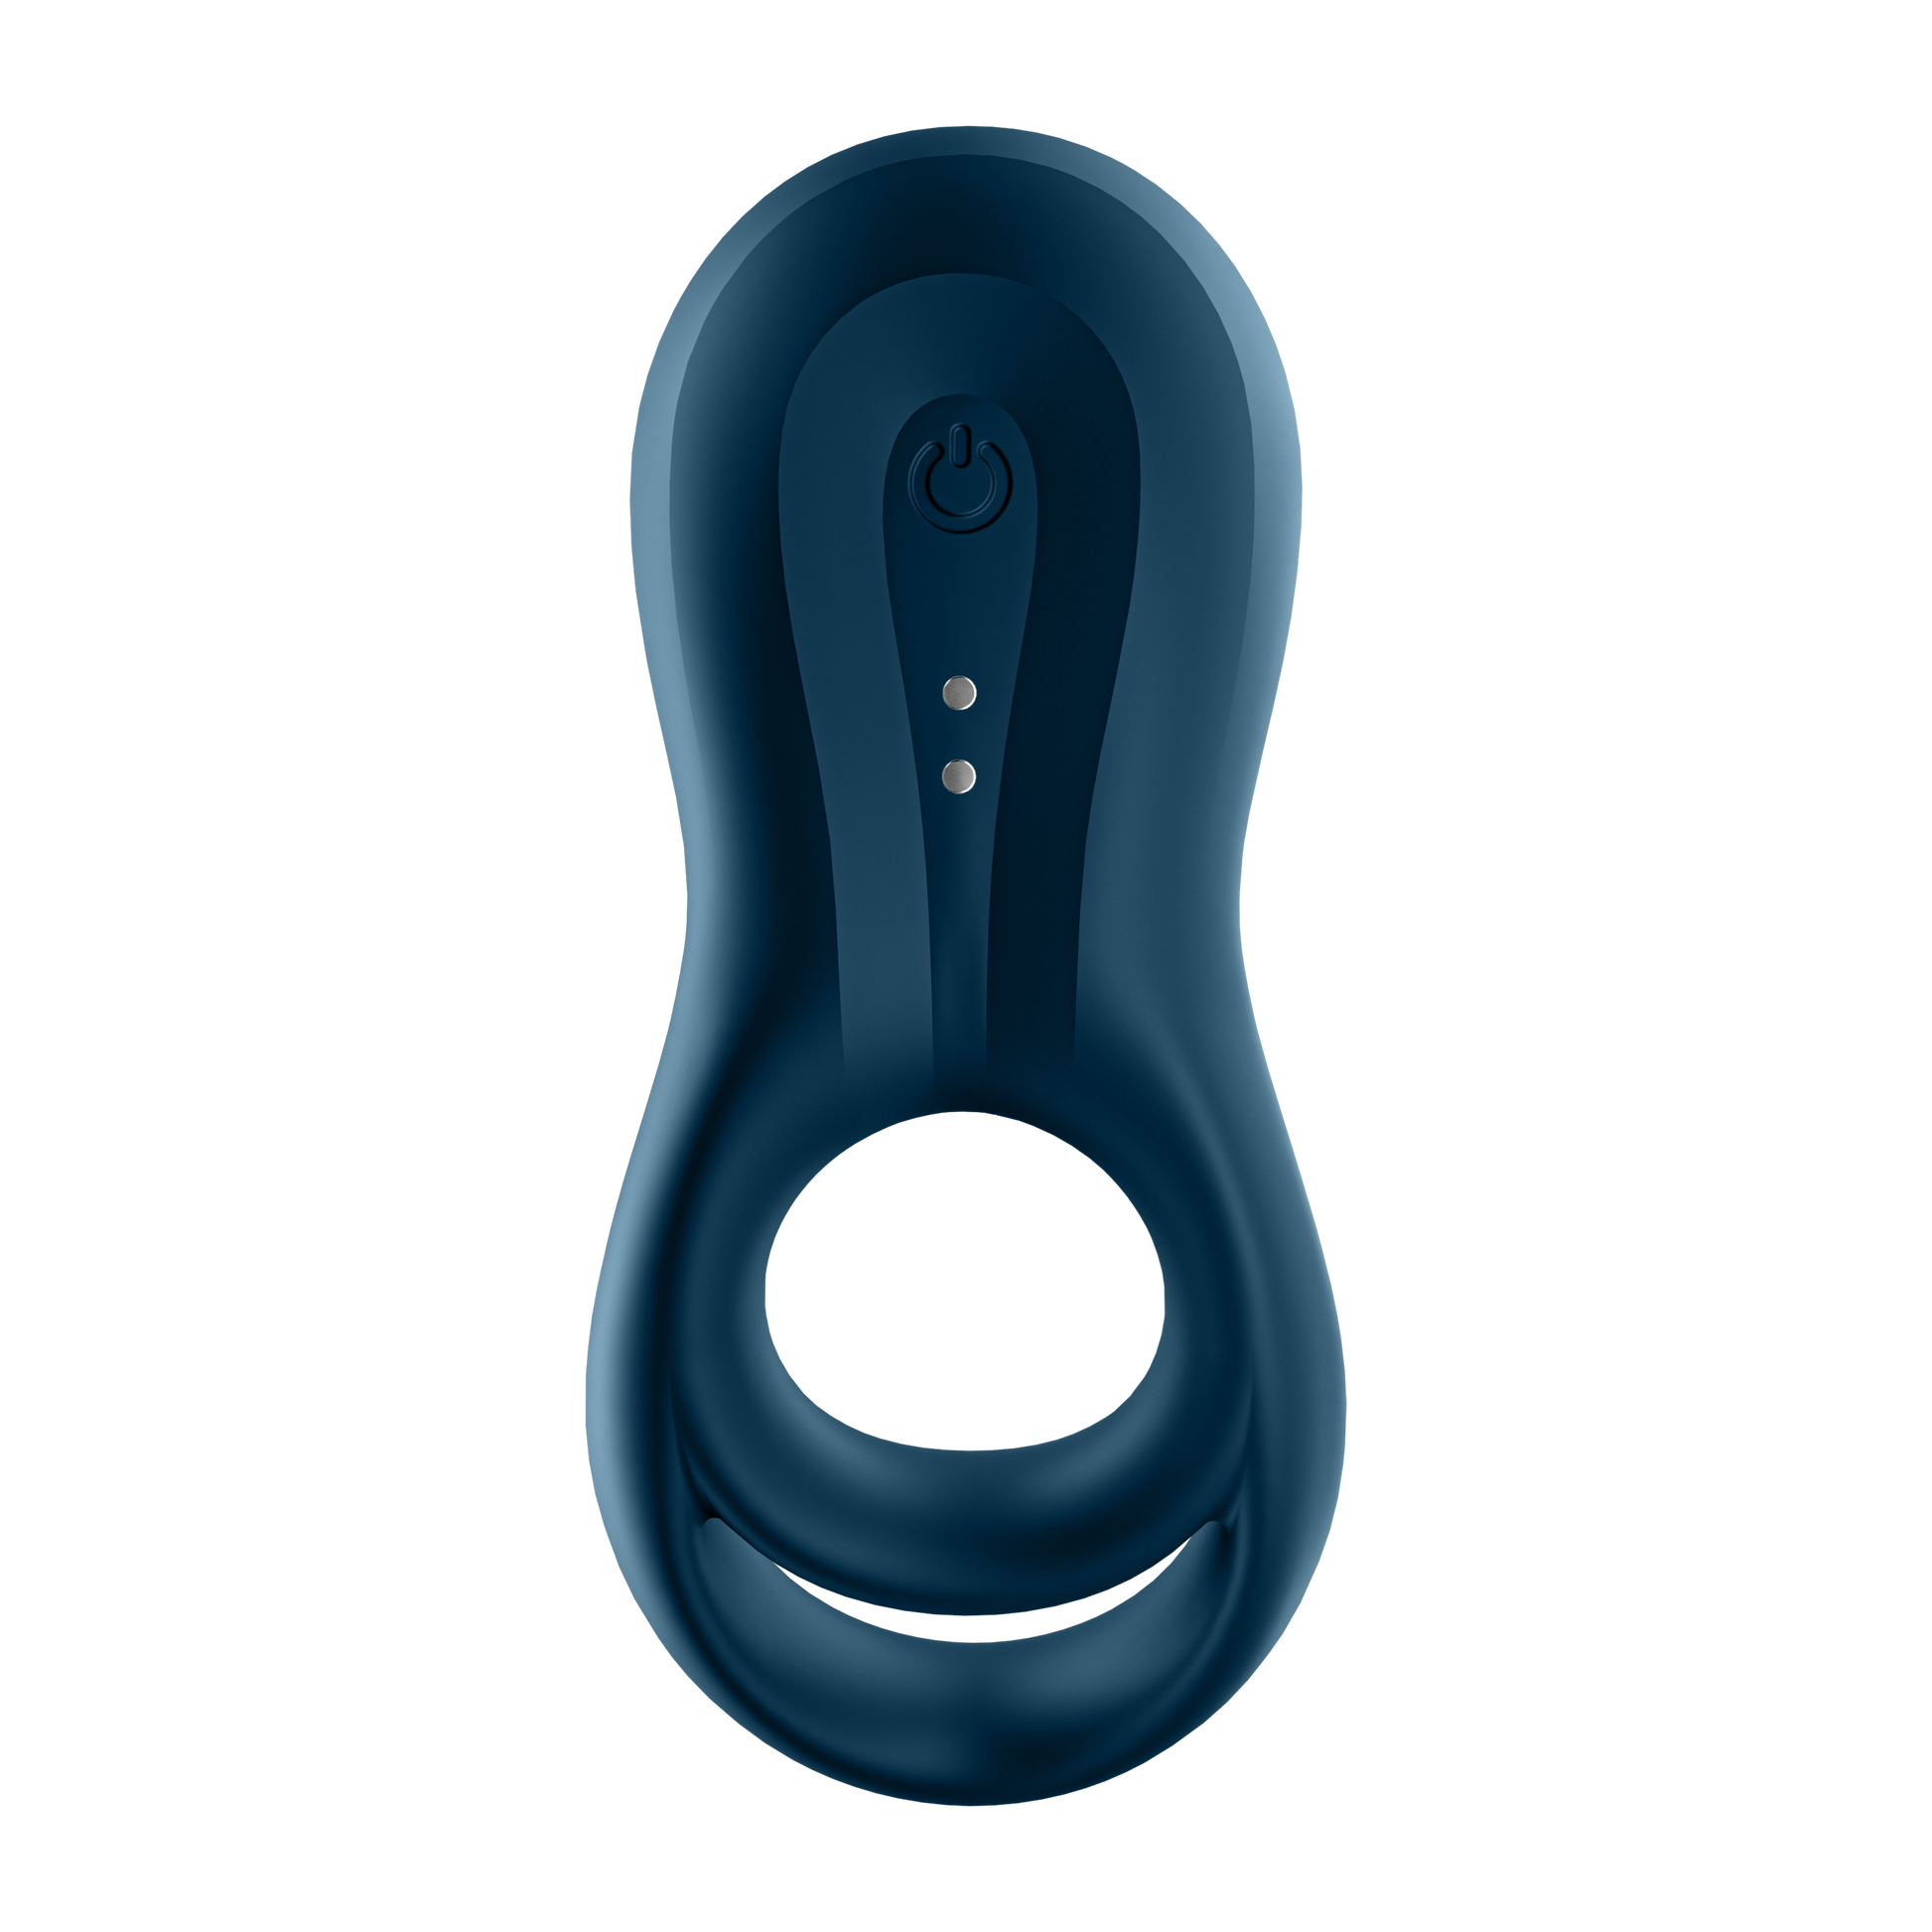 Bottom of the Satisfyer Epic Duo Ring Vibrator with the power button, with the charging port in the middle.